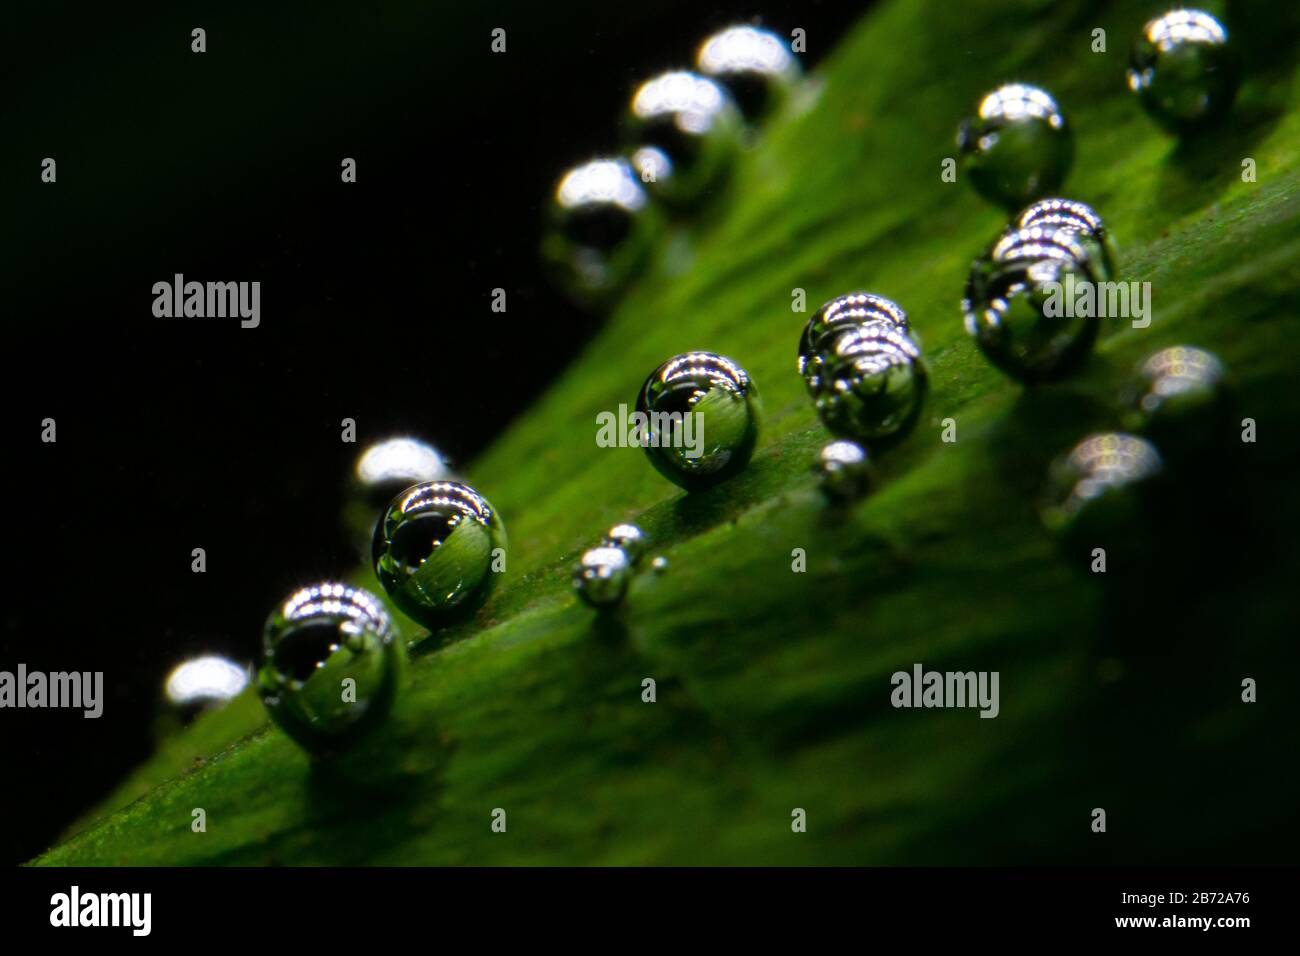 Macro photo of underwater aquatic plants producing small oxygen bubbles on their leaves also known as pearling Stock Photo